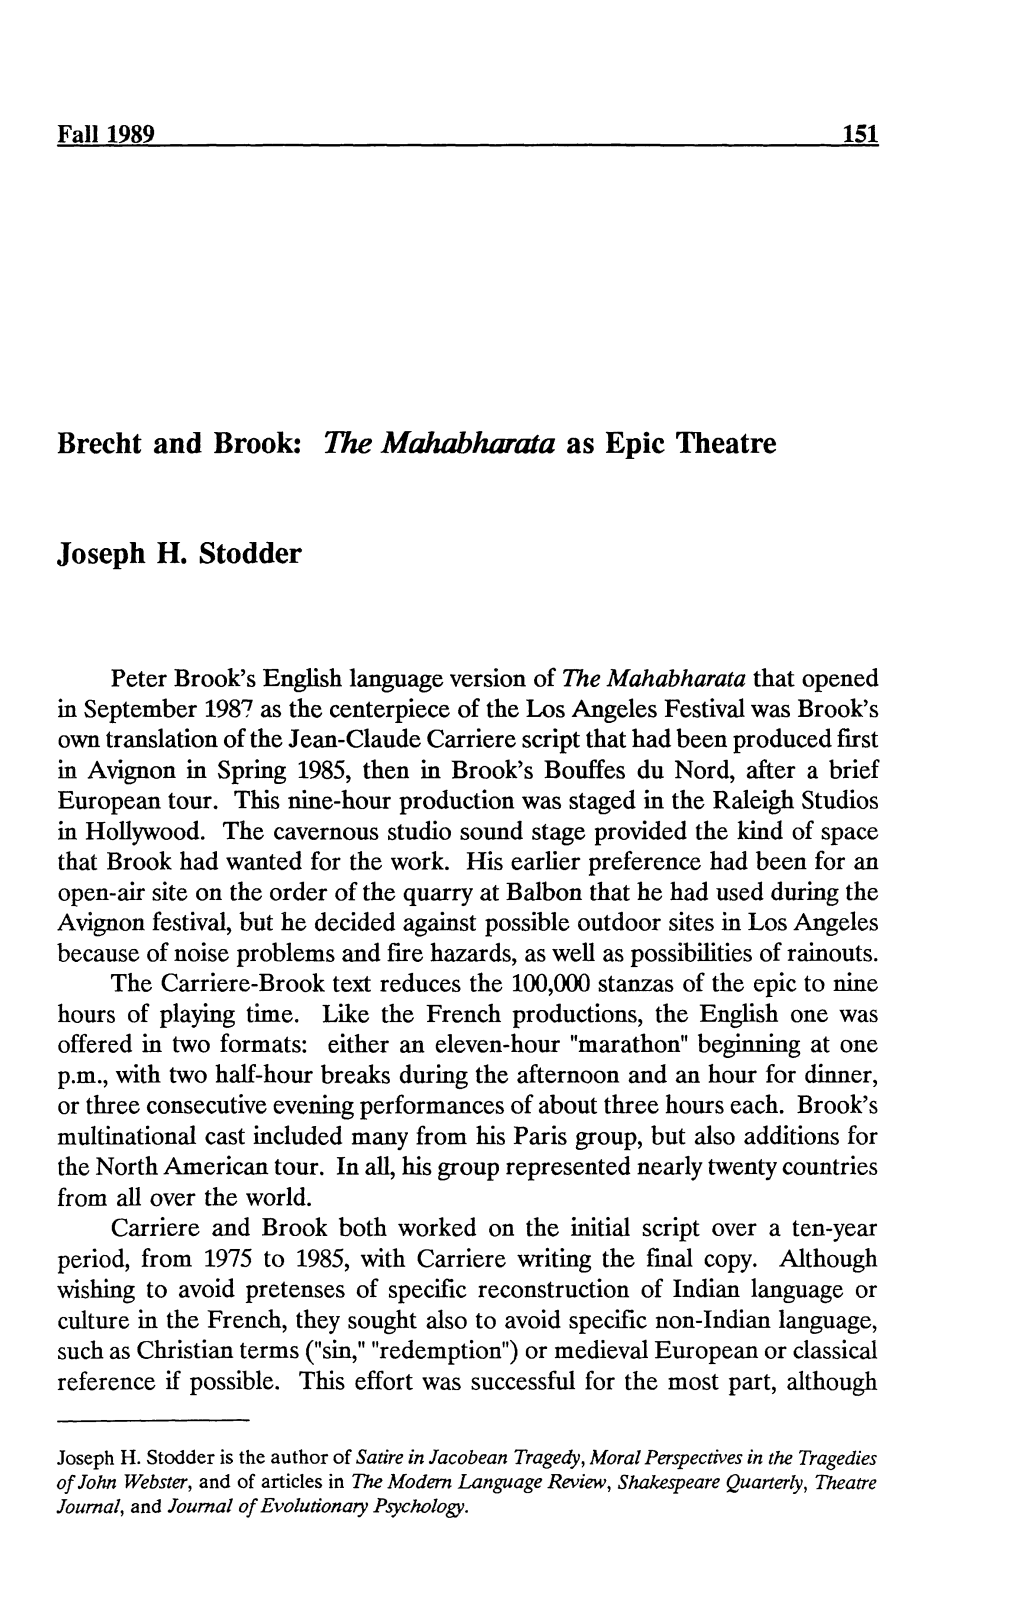 Brecht and Brook: the Mahabharata As Epic Theatre